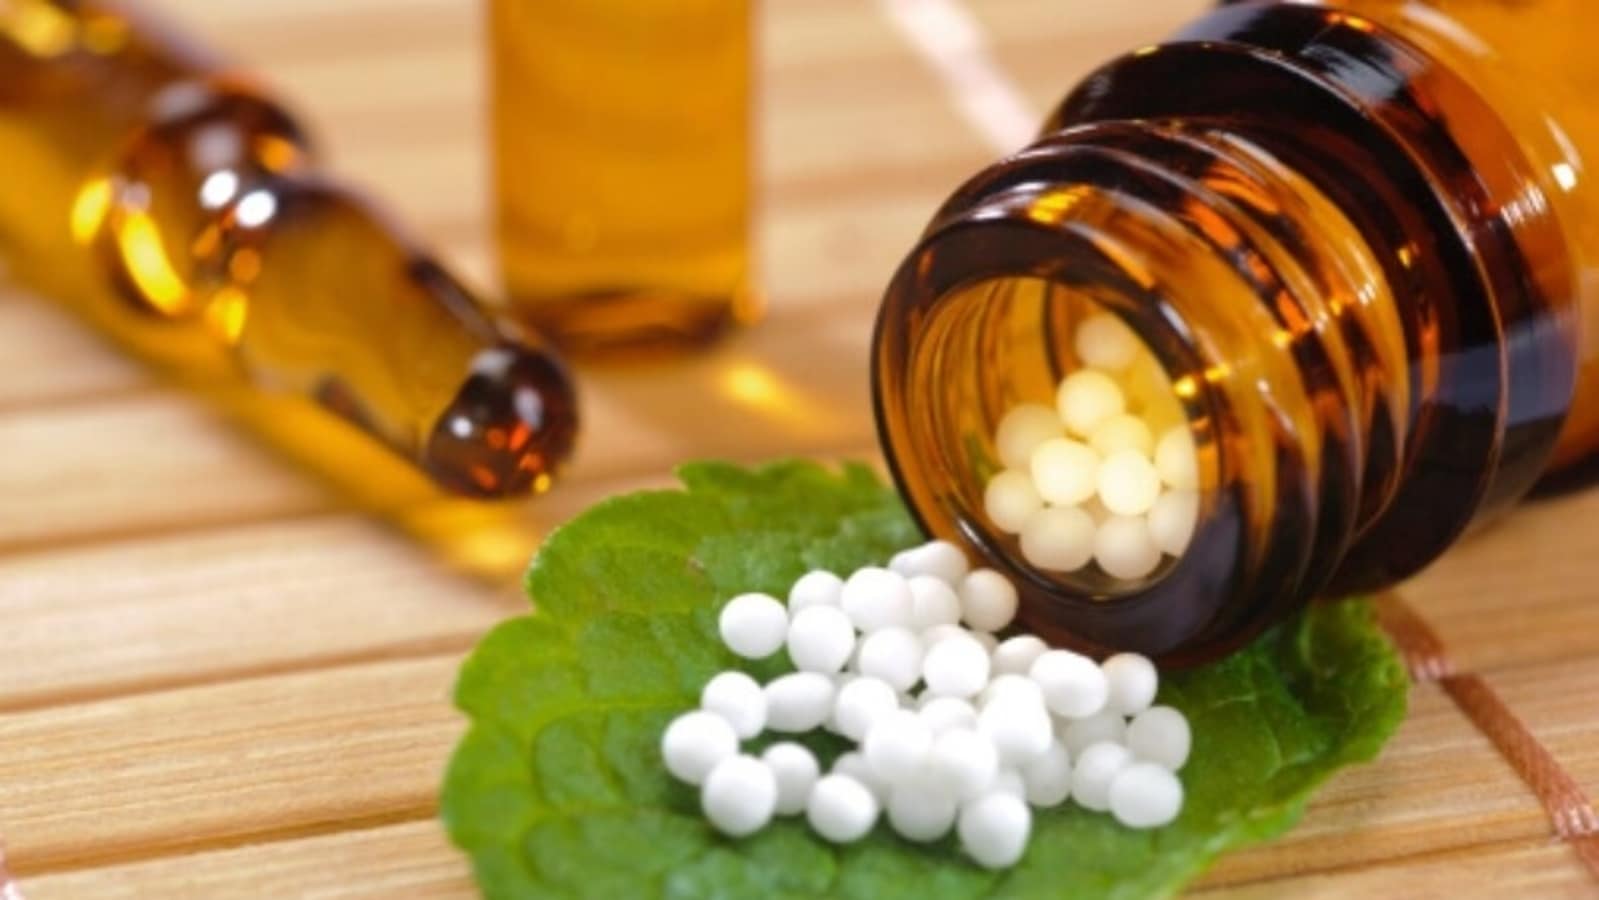 Is Homeopathy effective in treating ailments? Expert shares insights |  Health - Hindustan Times